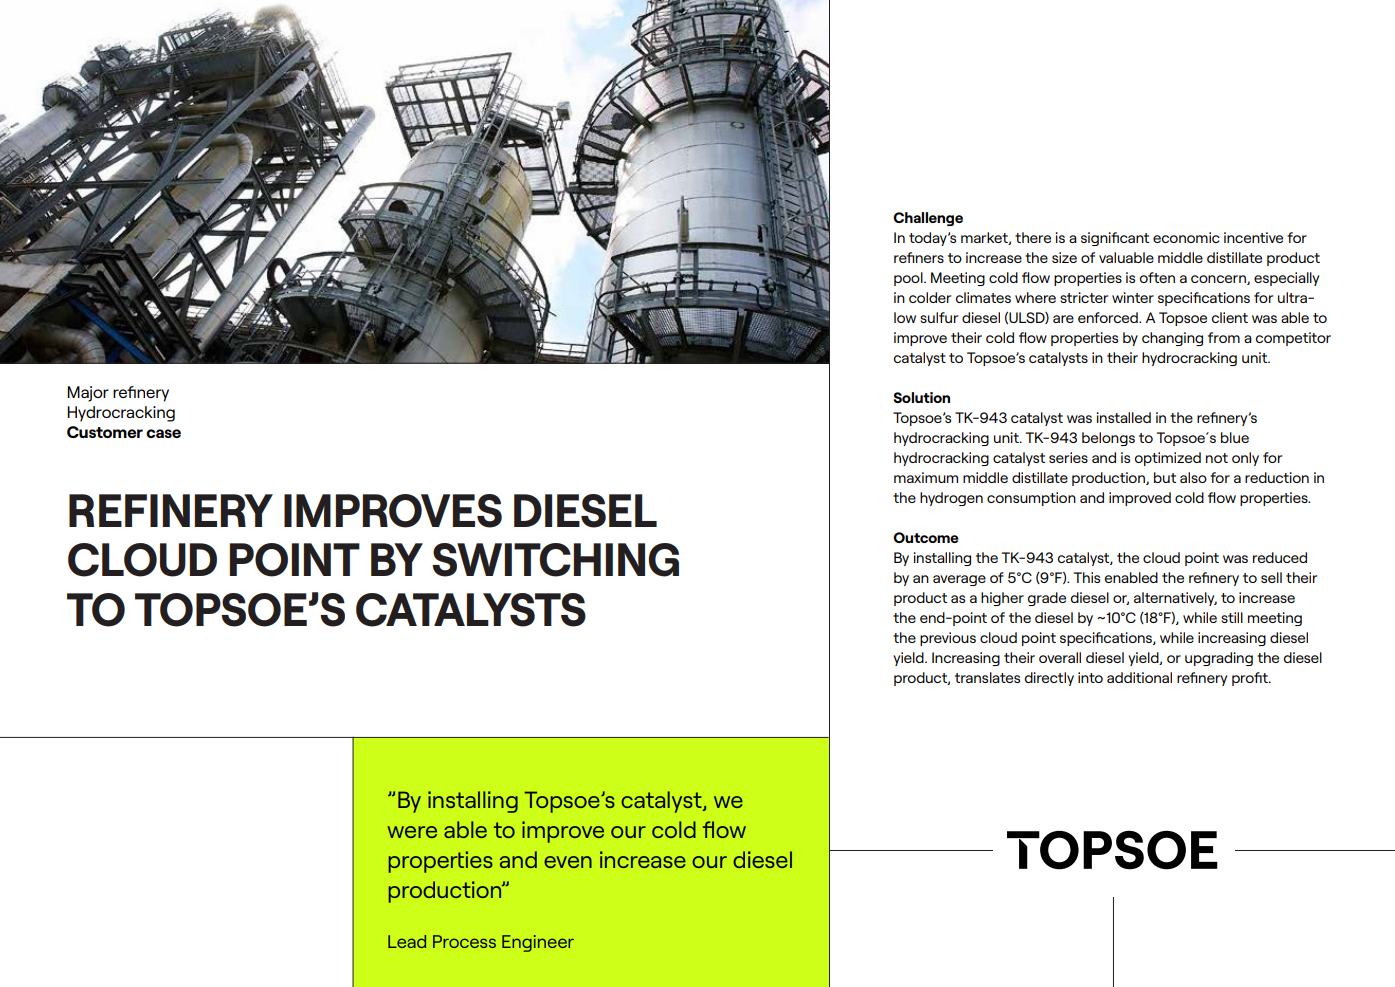 Refinery improves diesel cloud point by switching to Topsoe's catalysts